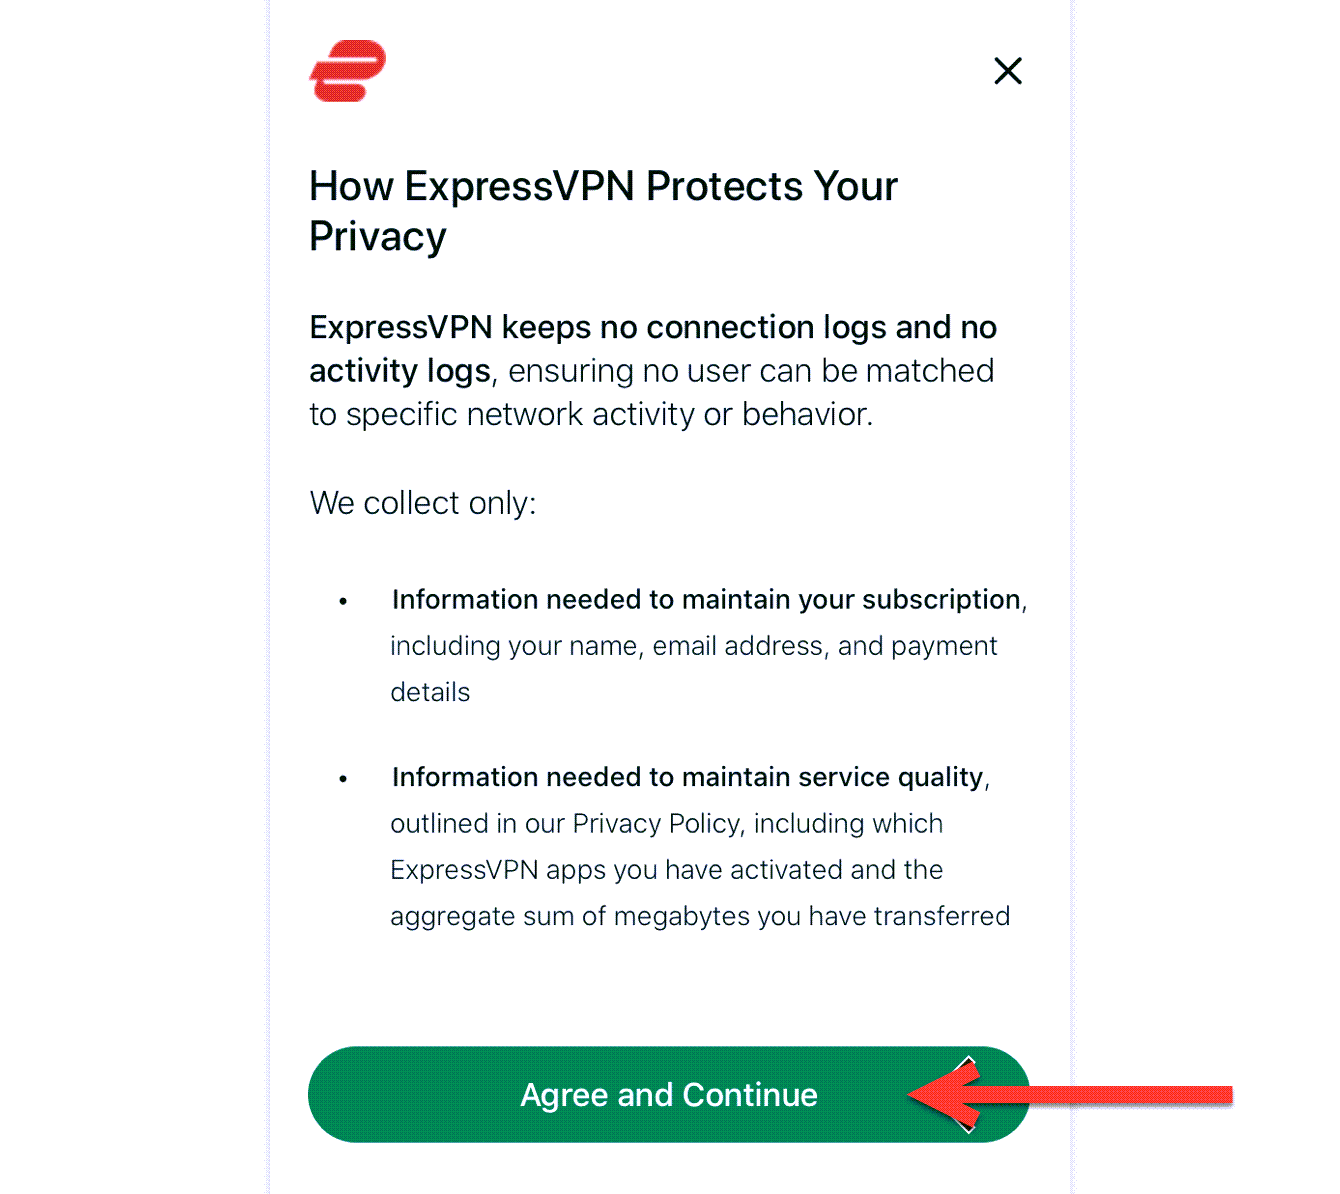 expressvpn-ios-10.0.0-protect-your-privacy-tap-agree-and-continue-in-UAE